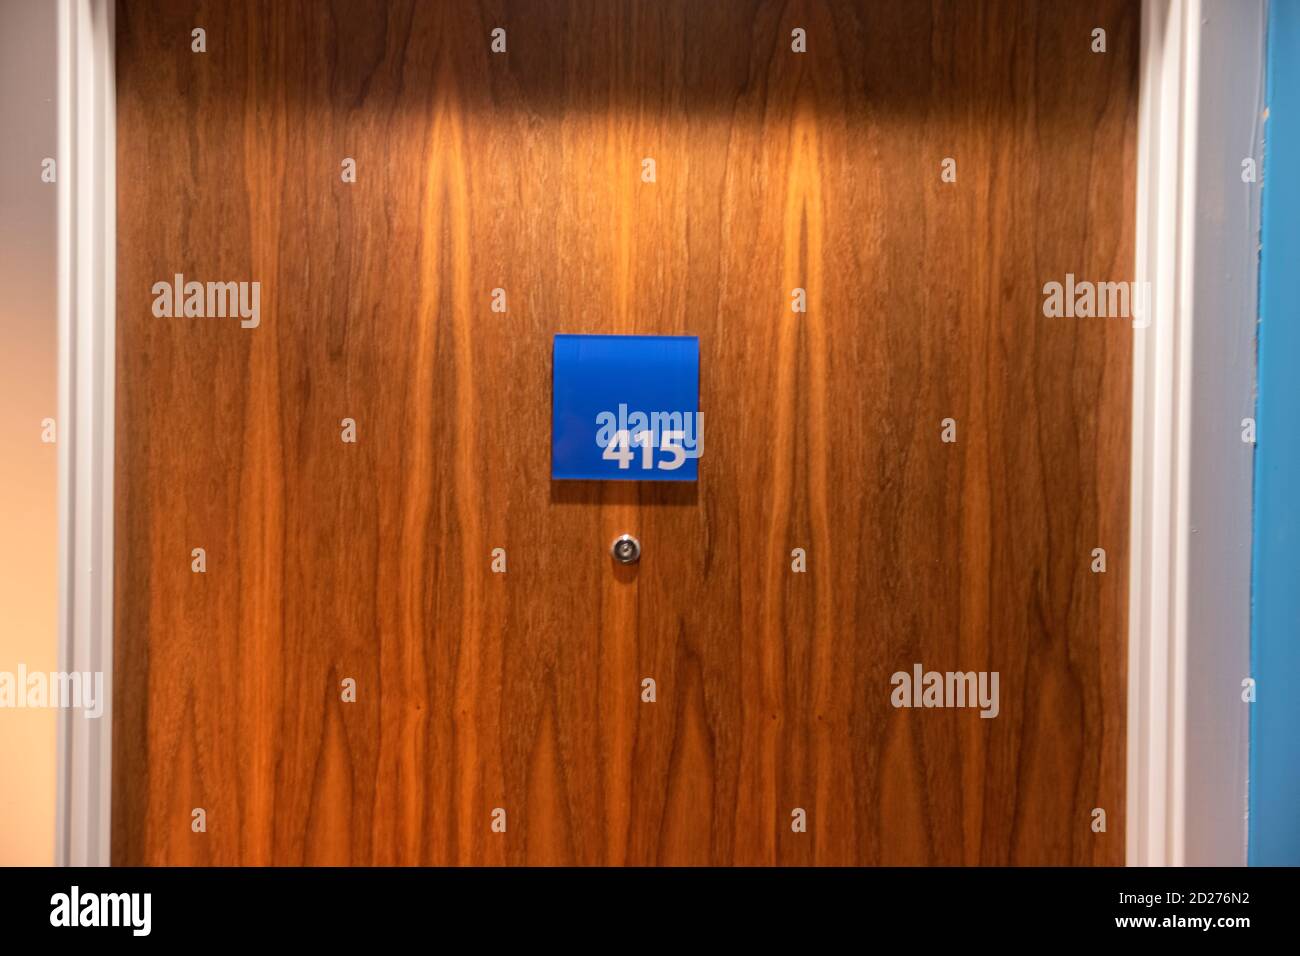 Hotel Room Number 415 At Manchester England 9-12-2019 Stock Photo